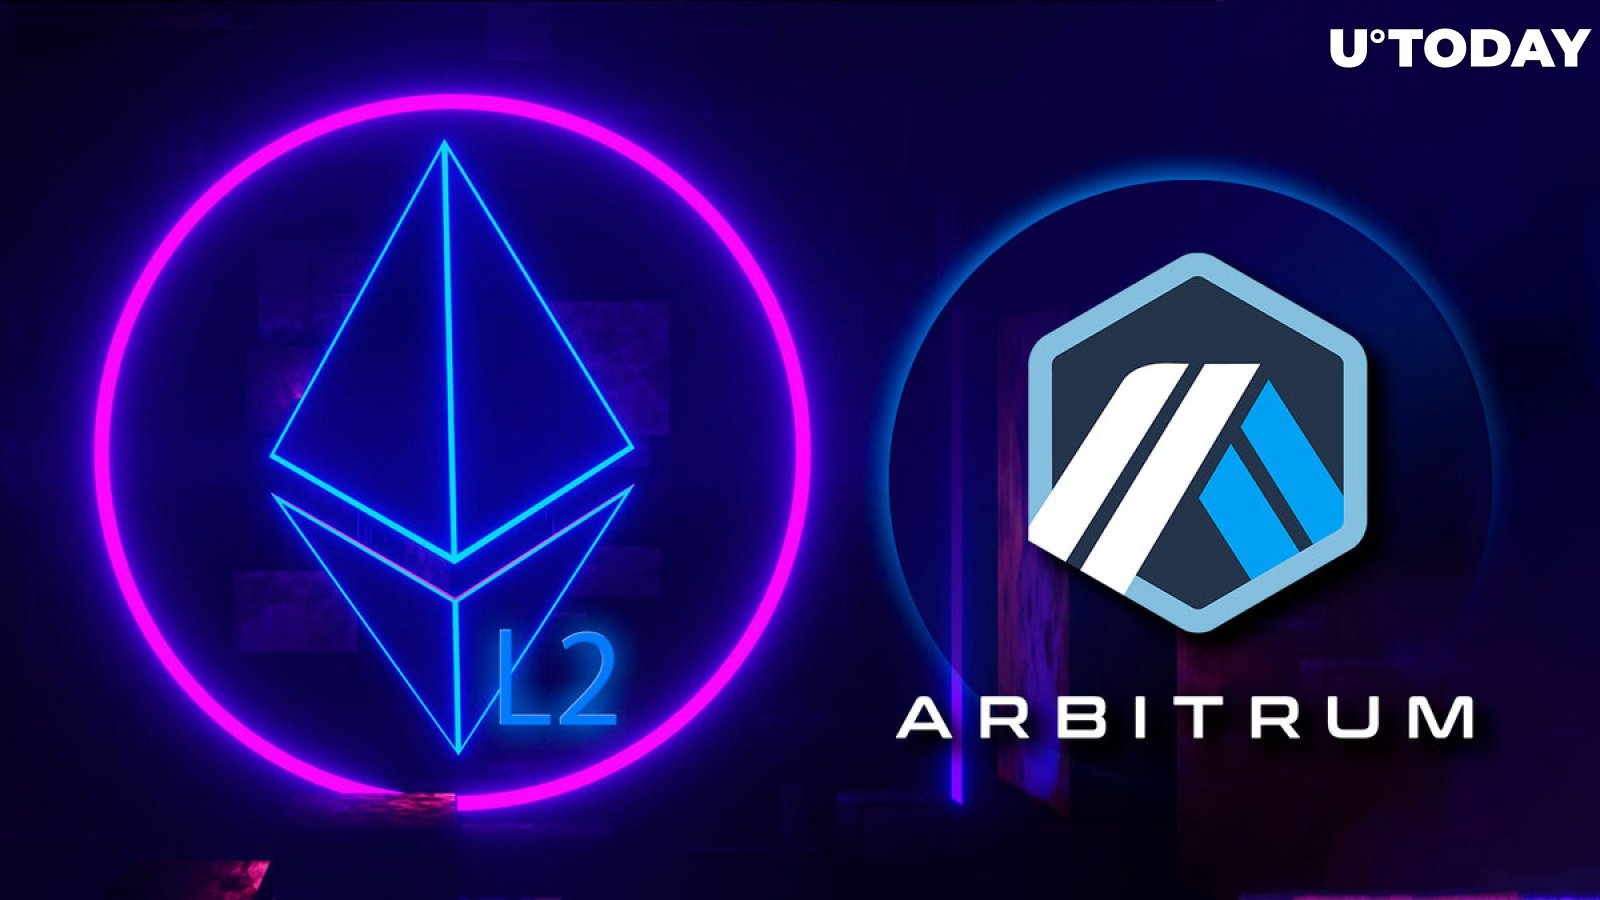 Here's Why Arbitrum Became #1 Ethereum L2 Scaler: Opinion